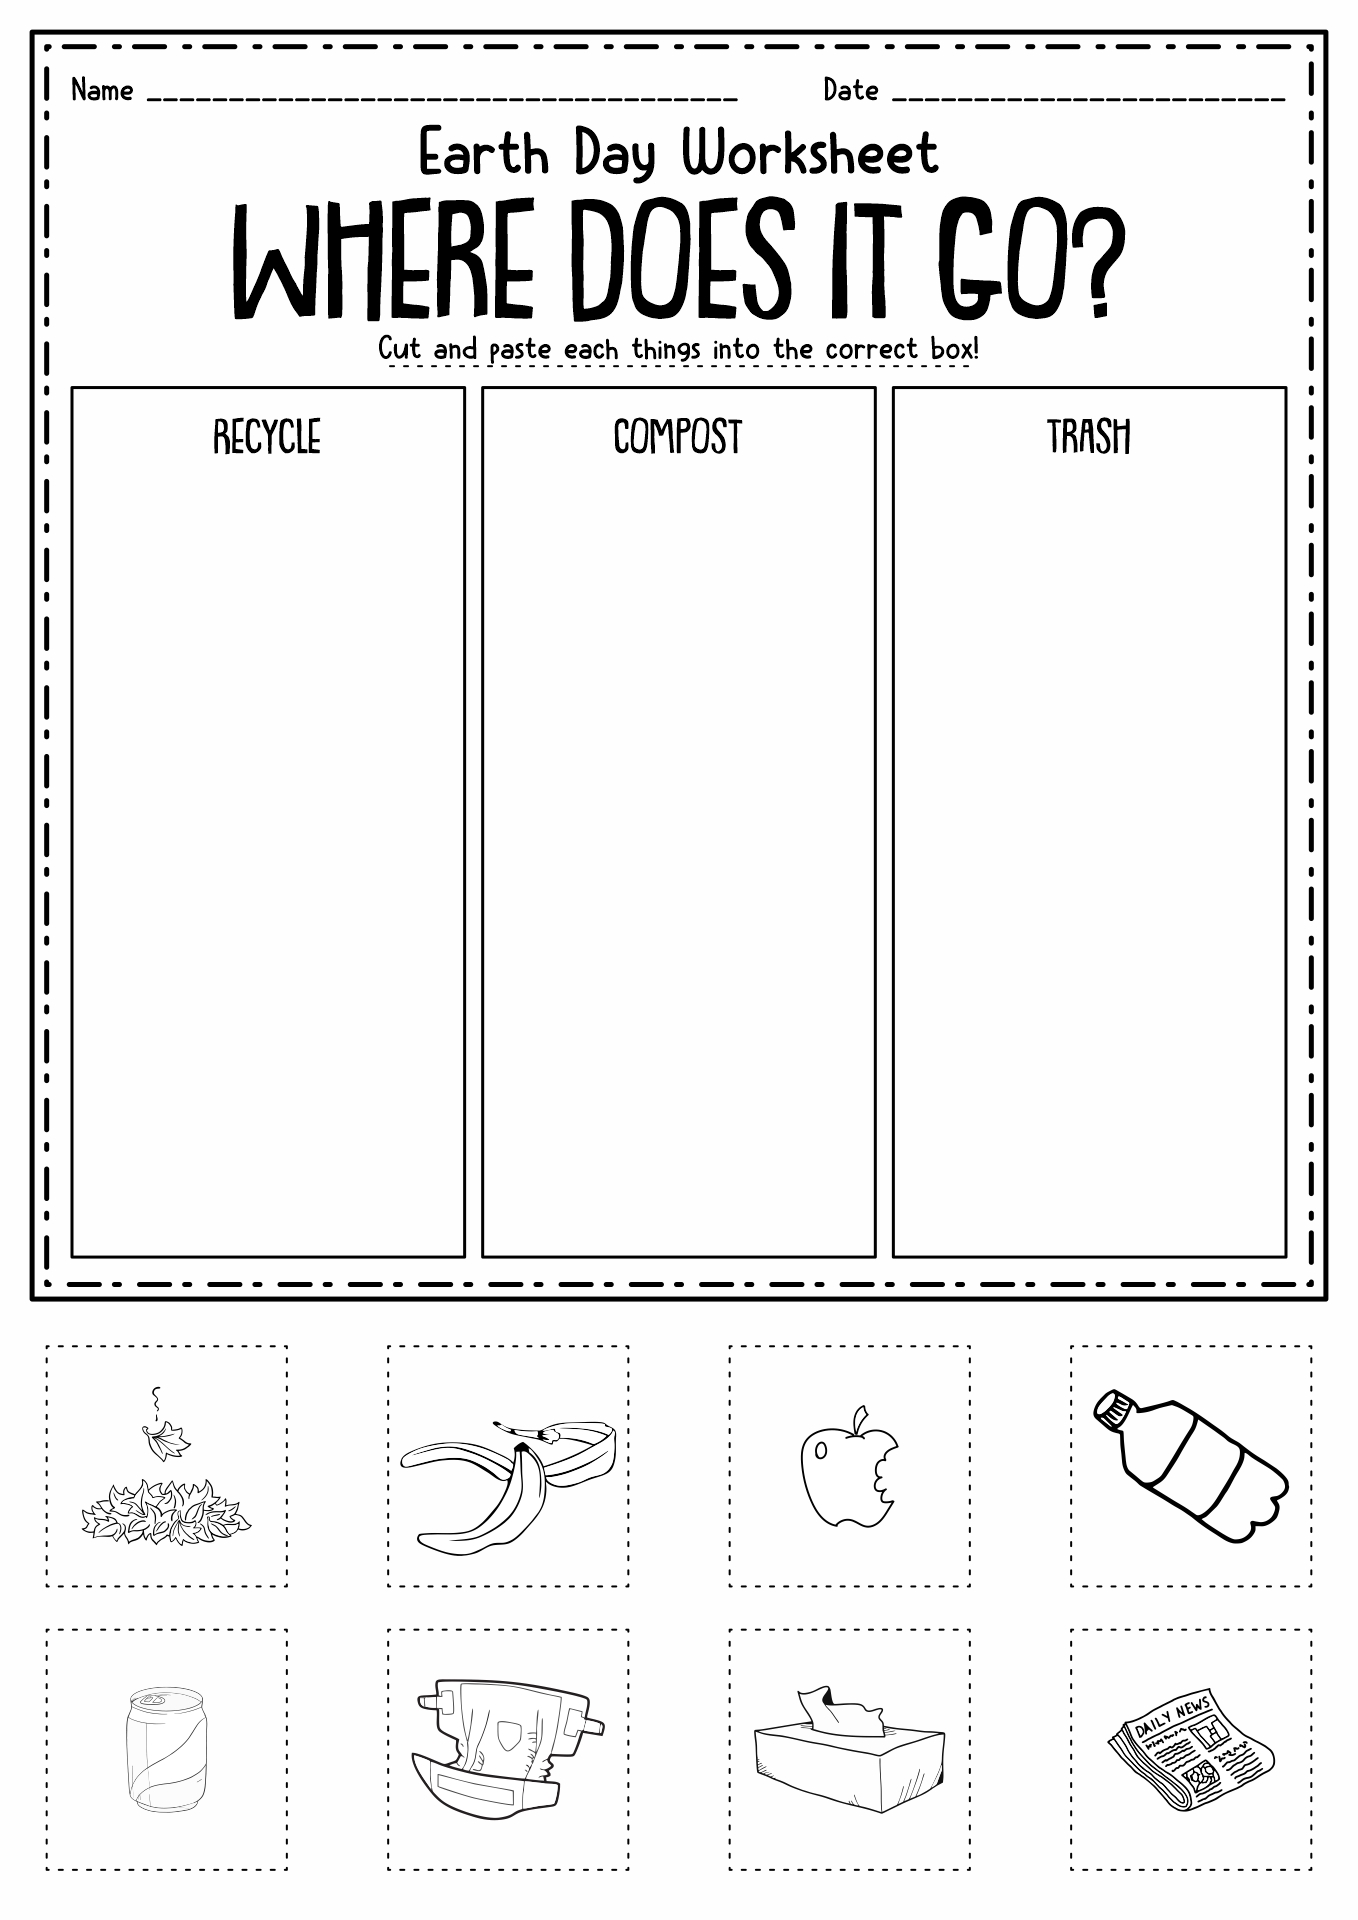 Earth Day Worksheets First Grade Image